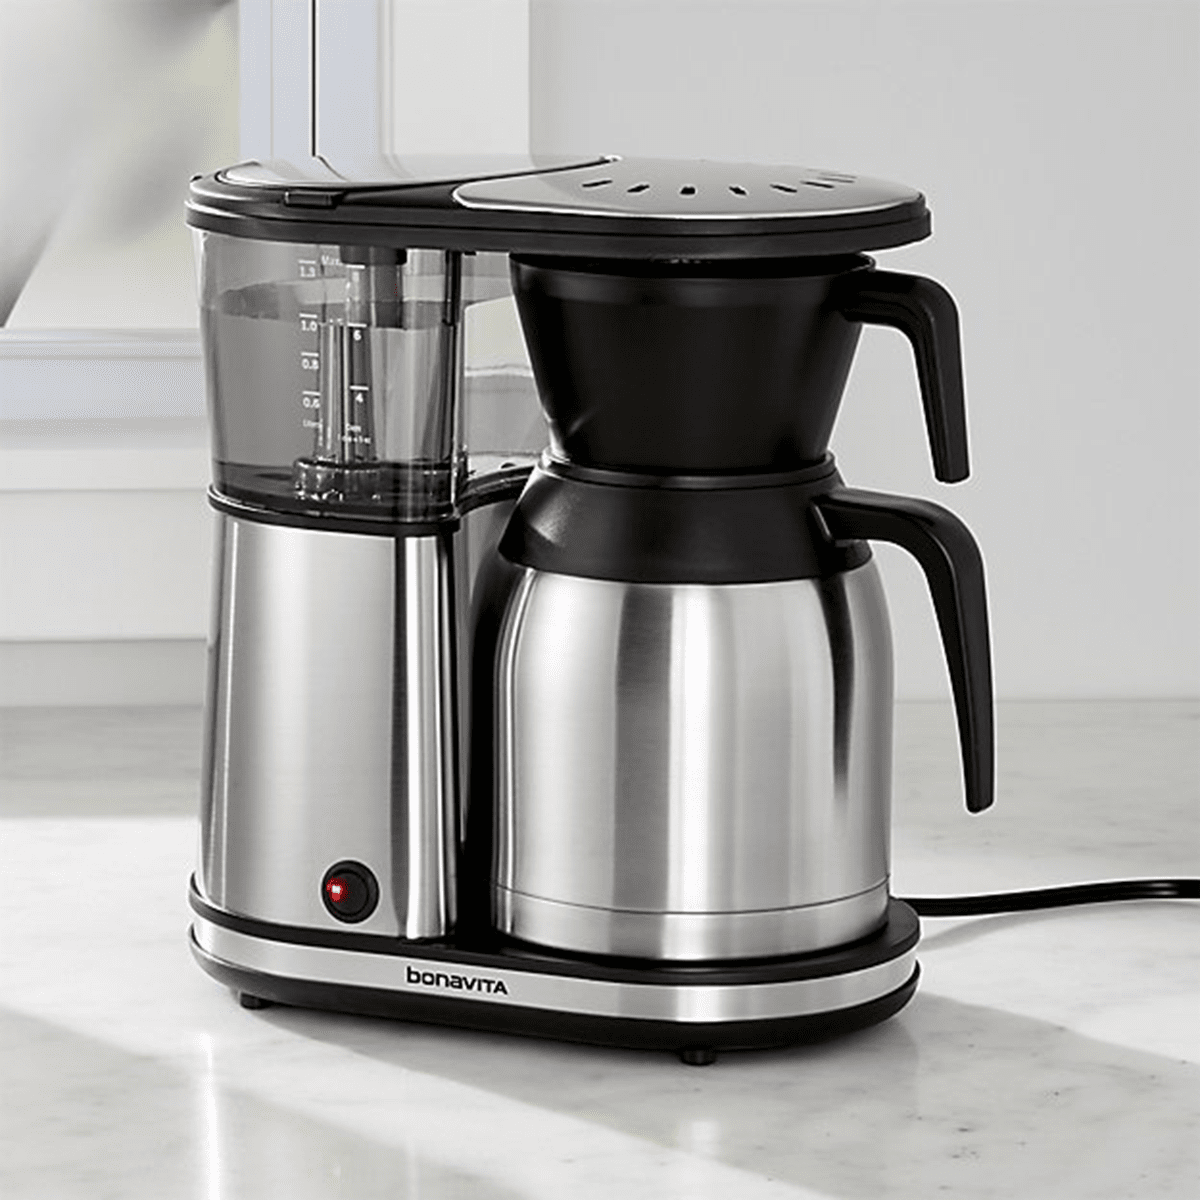 https://s3-assets.quenchessentials.com/media/images/products/bonavita-8-cup-ss-carafe-coffee-maker-lifestyle-1.png